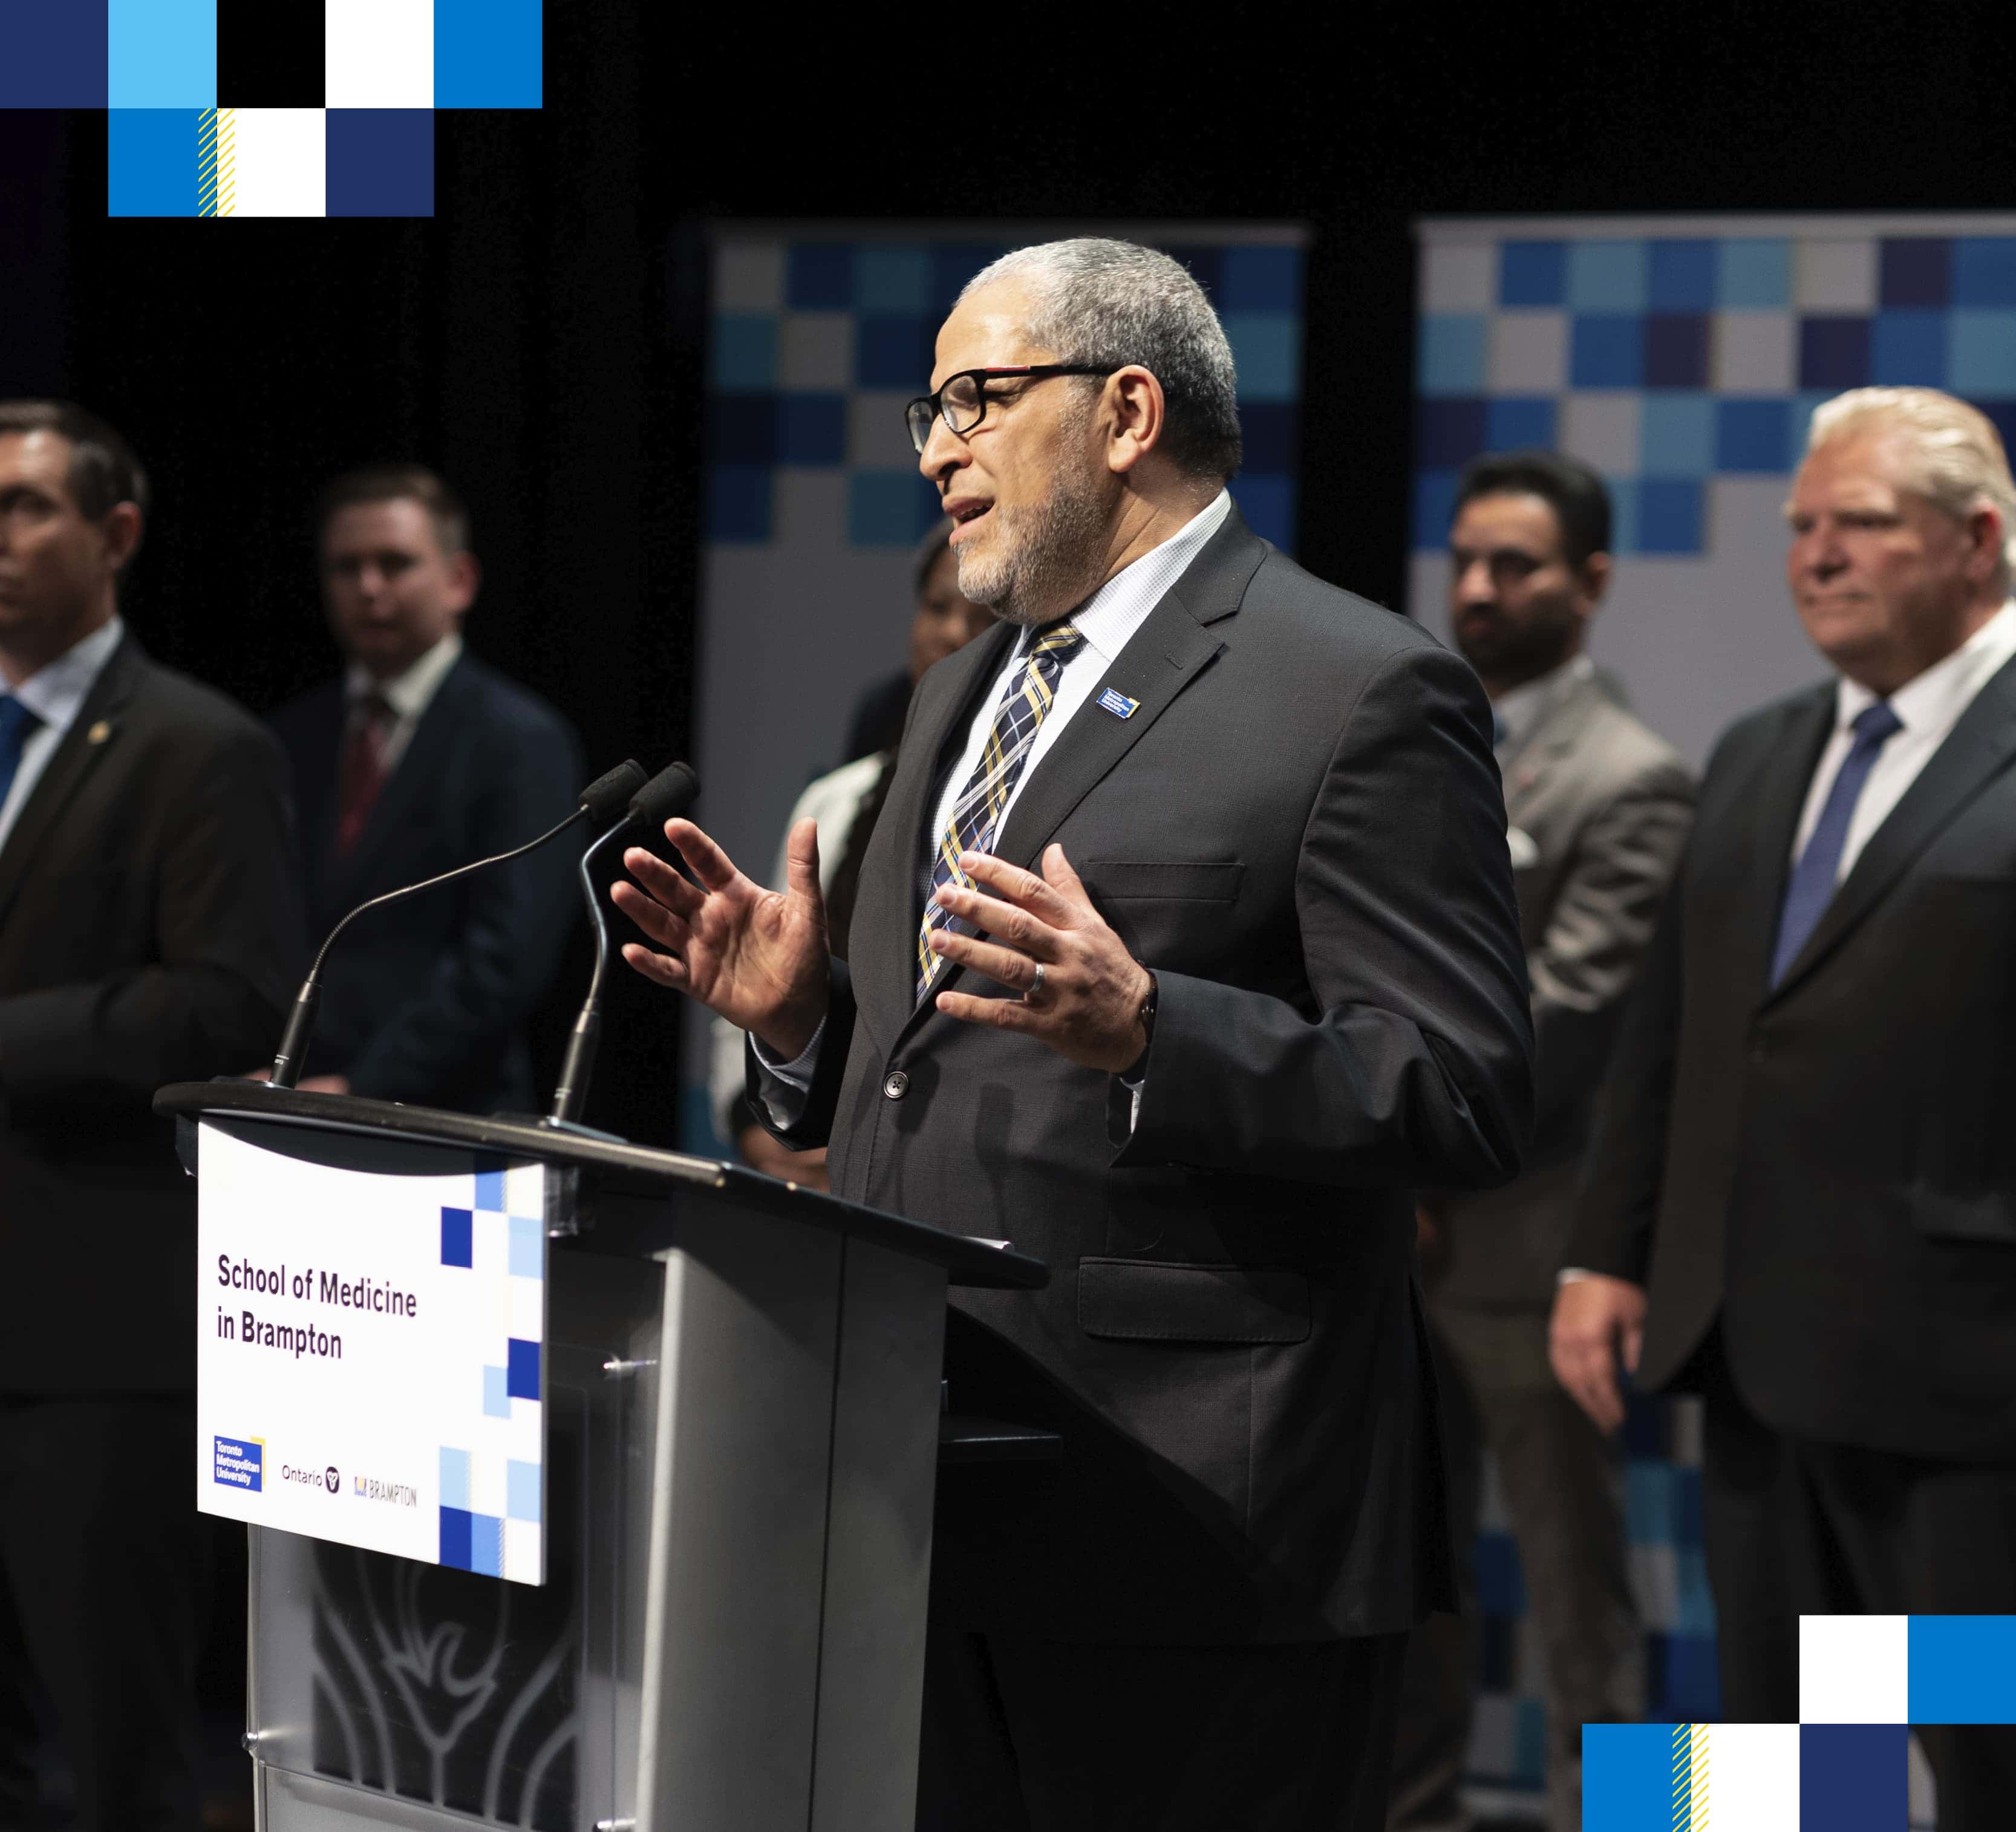 TMU President Mohamed Lachemi standing at a podium with Ontario Premier Doug Ford to his right.